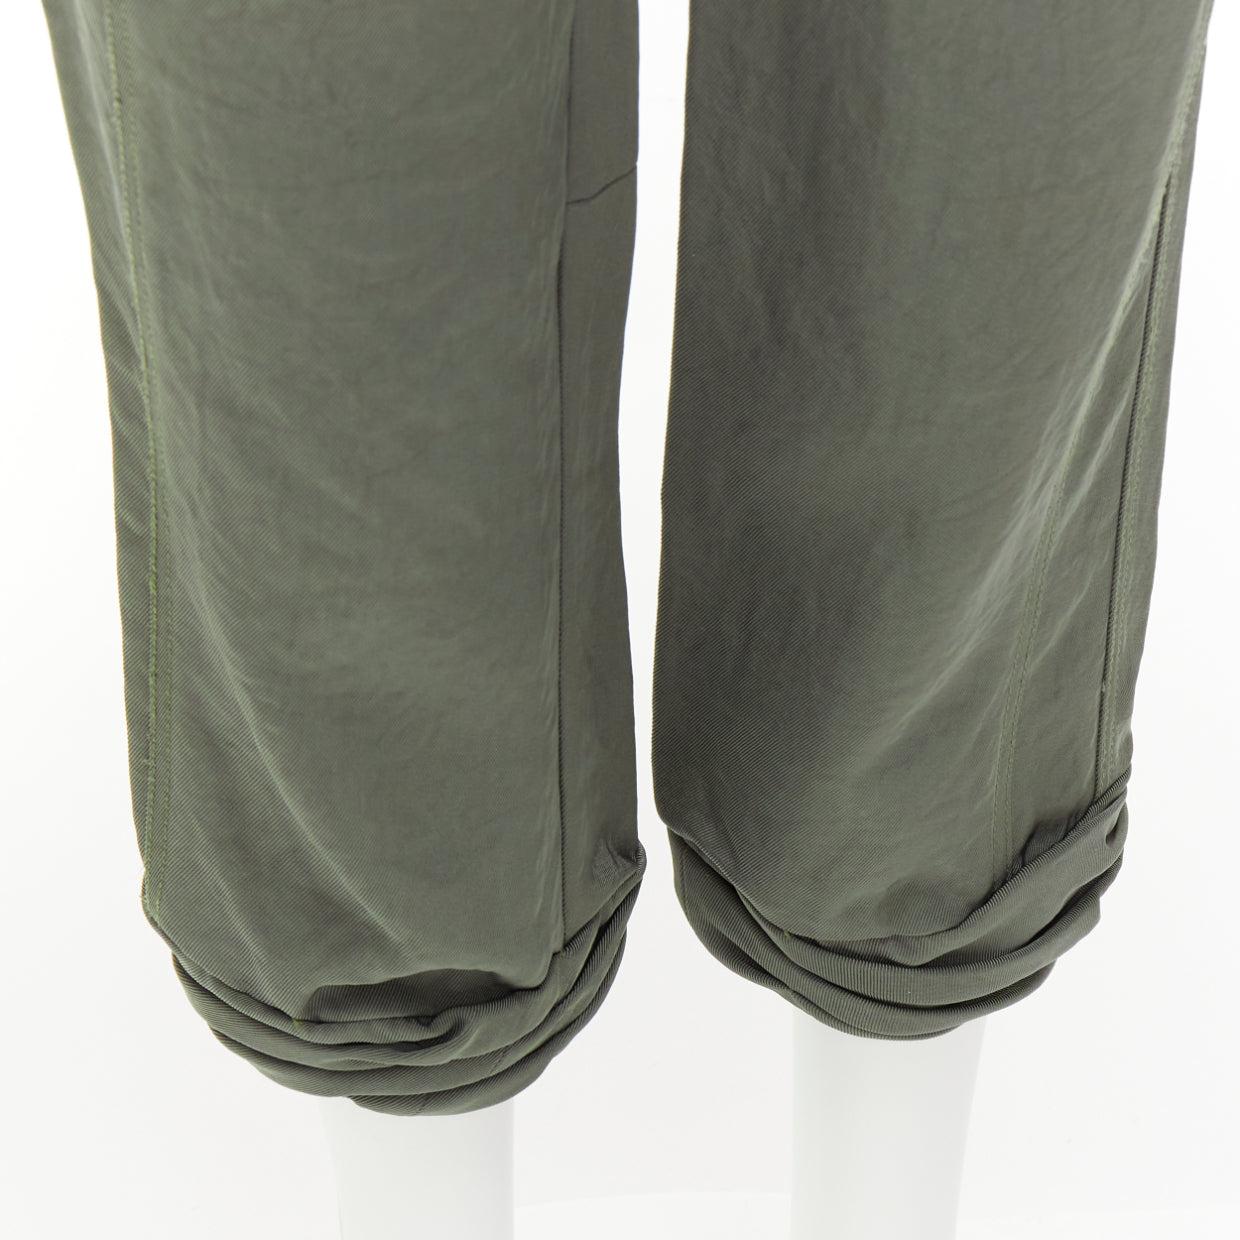 ALEXANDER WANG khaki twill panelled back pockets ruched hem safari pants US0 XS
Reference: NKLL/A00208
Brand: Alexander Wang
Designer: Alexander Wang
Material: Twill
Color: Khaki
Pattern: Solid
Closure: Zip Fly
Lining: Green Fabric
Extra Details: